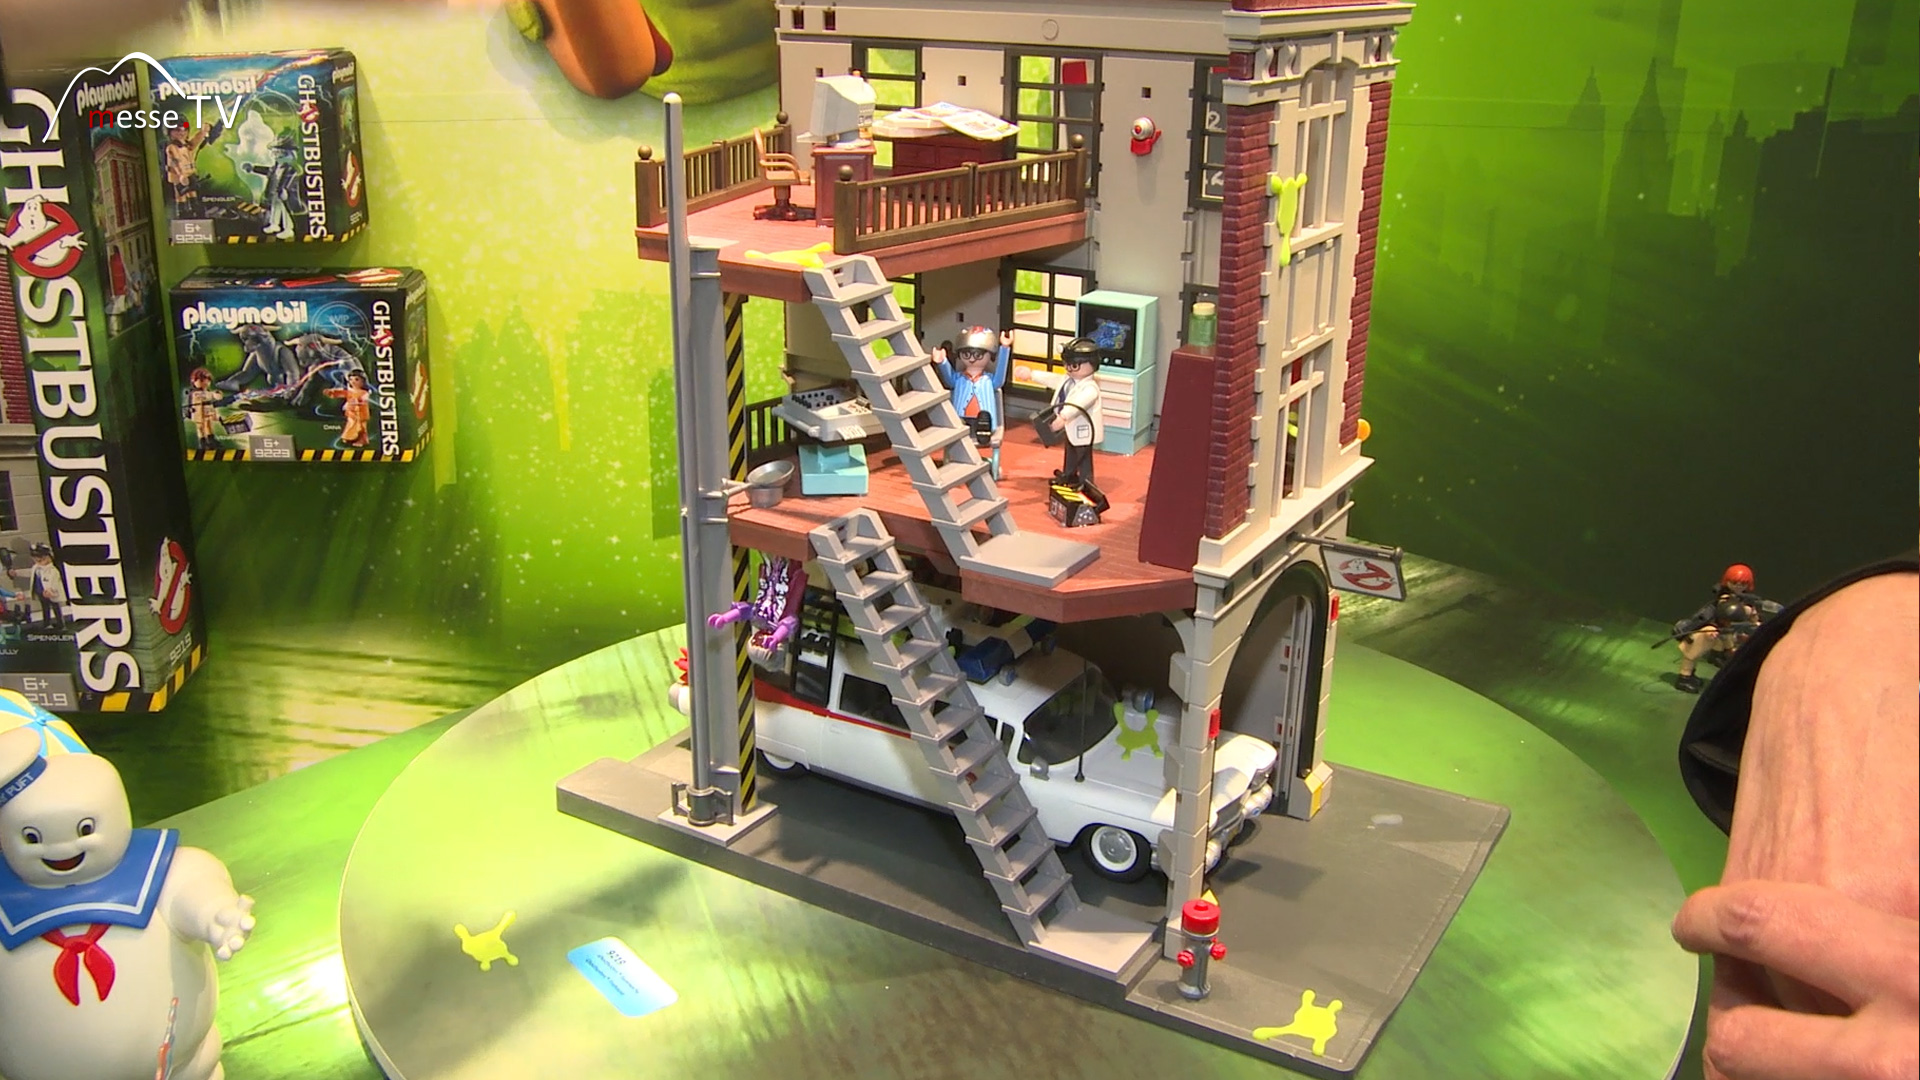 Playmobil Ghostbusters House